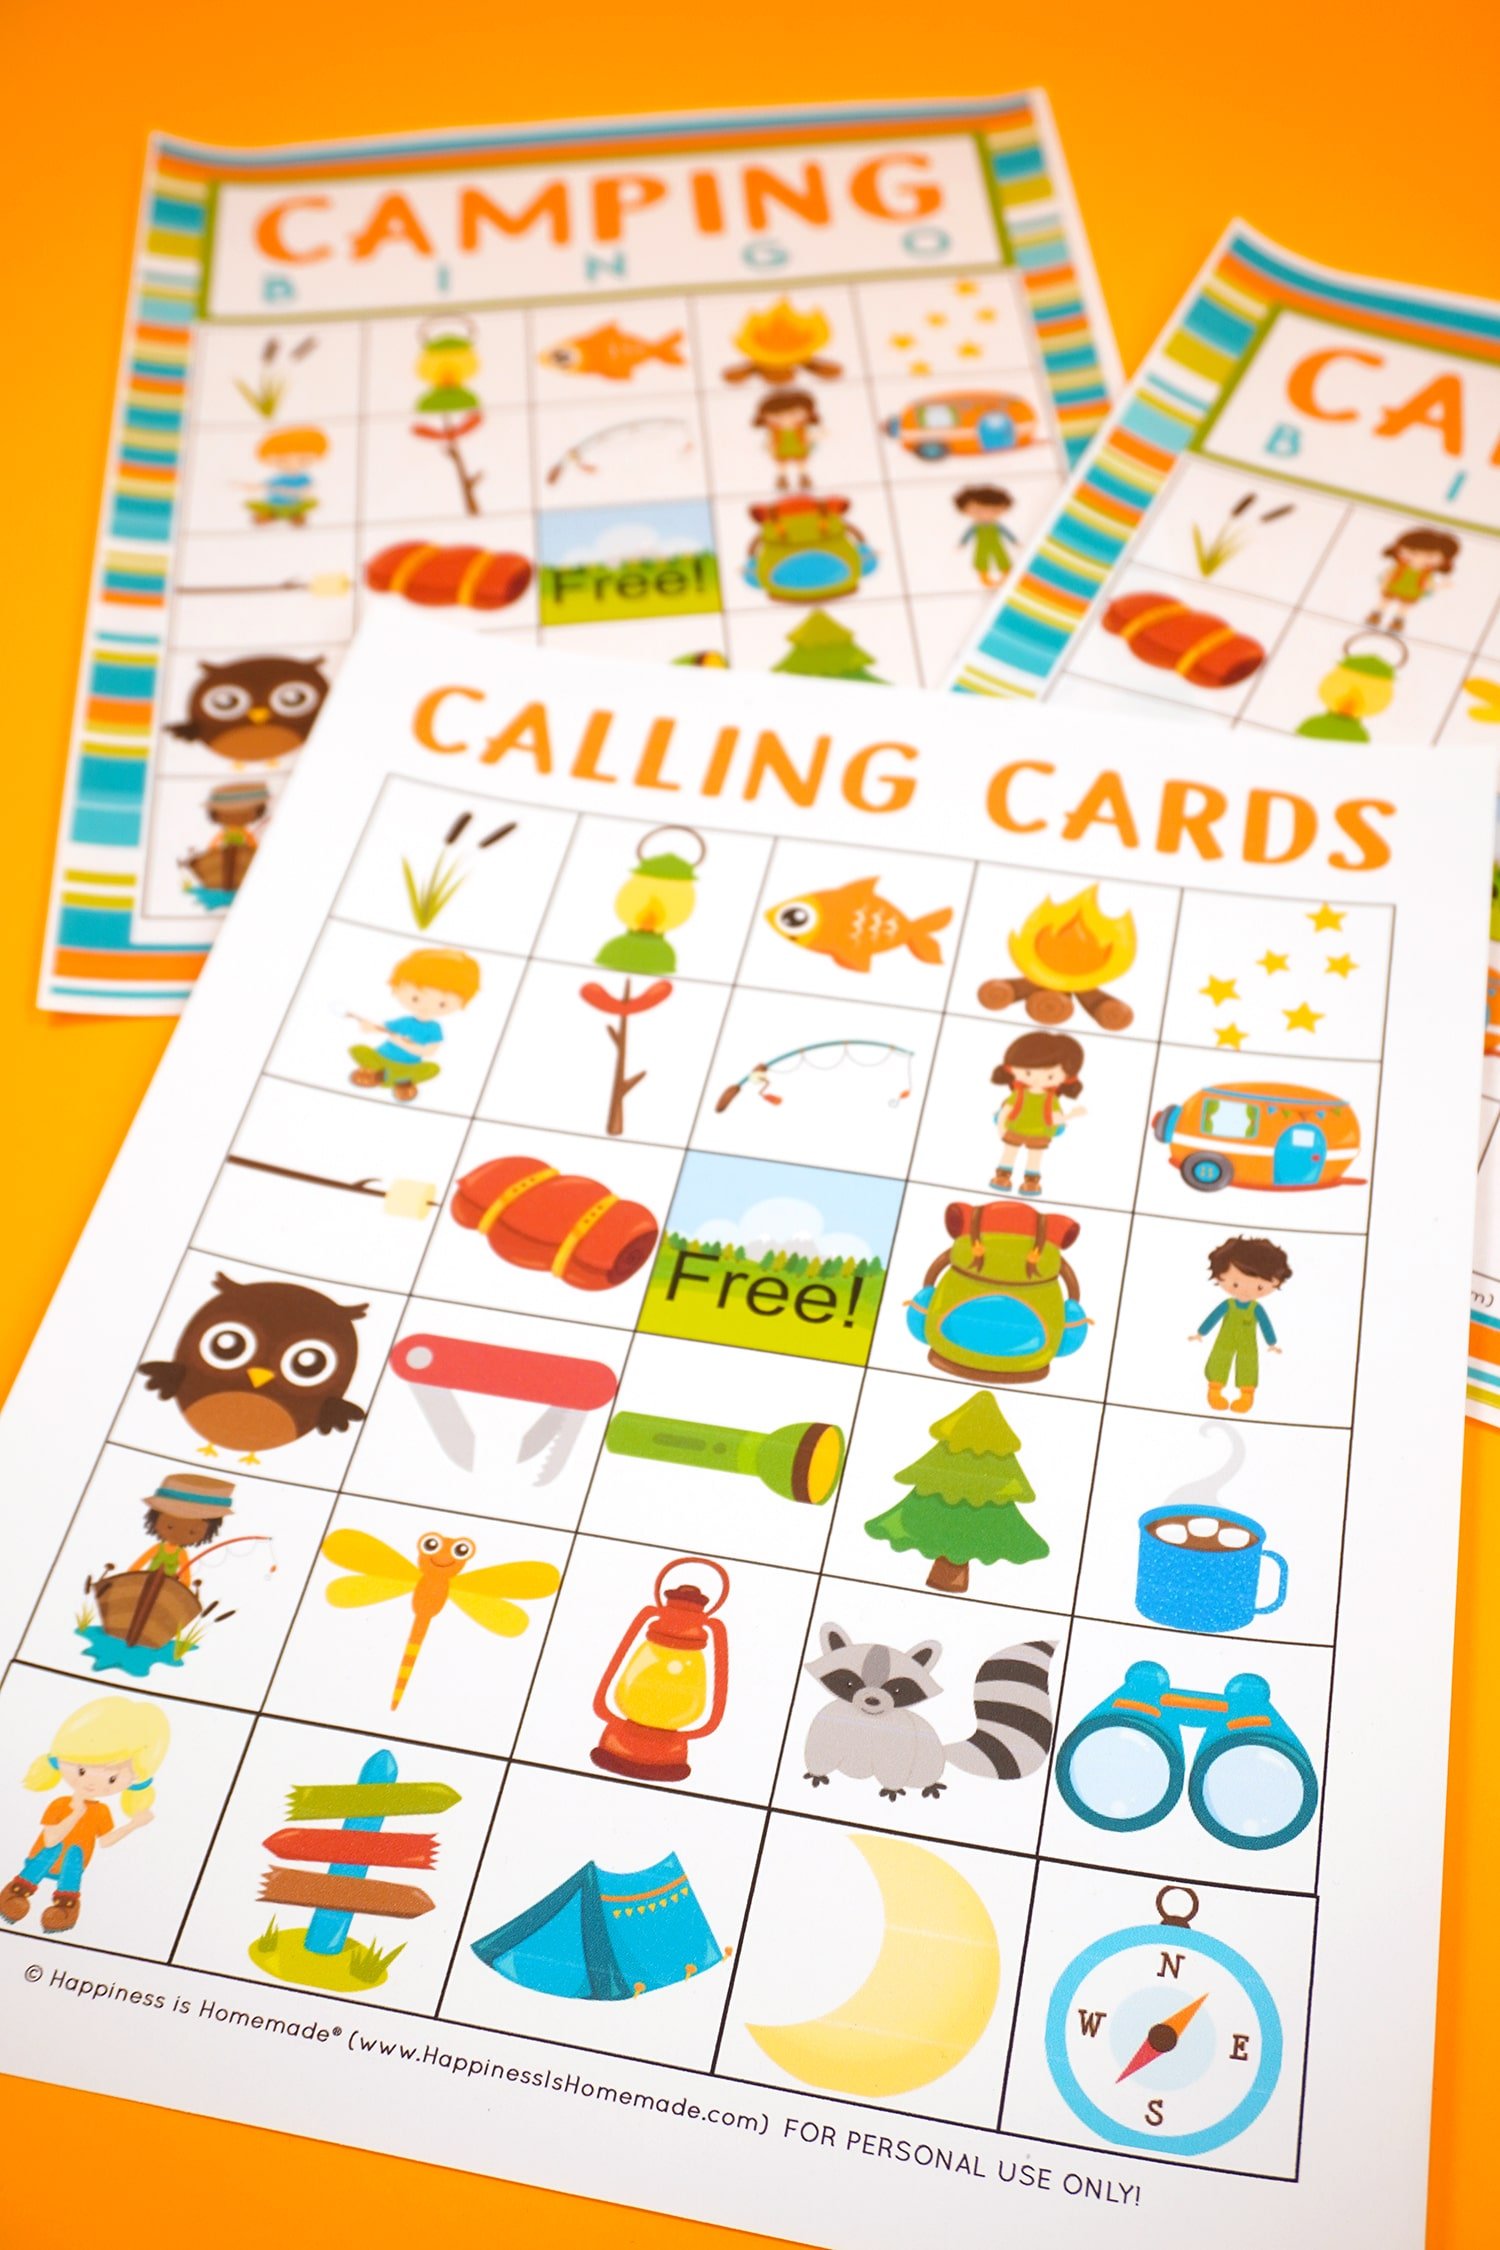 Two Camping Bingo Printable game cards on a n orange background with calling cards